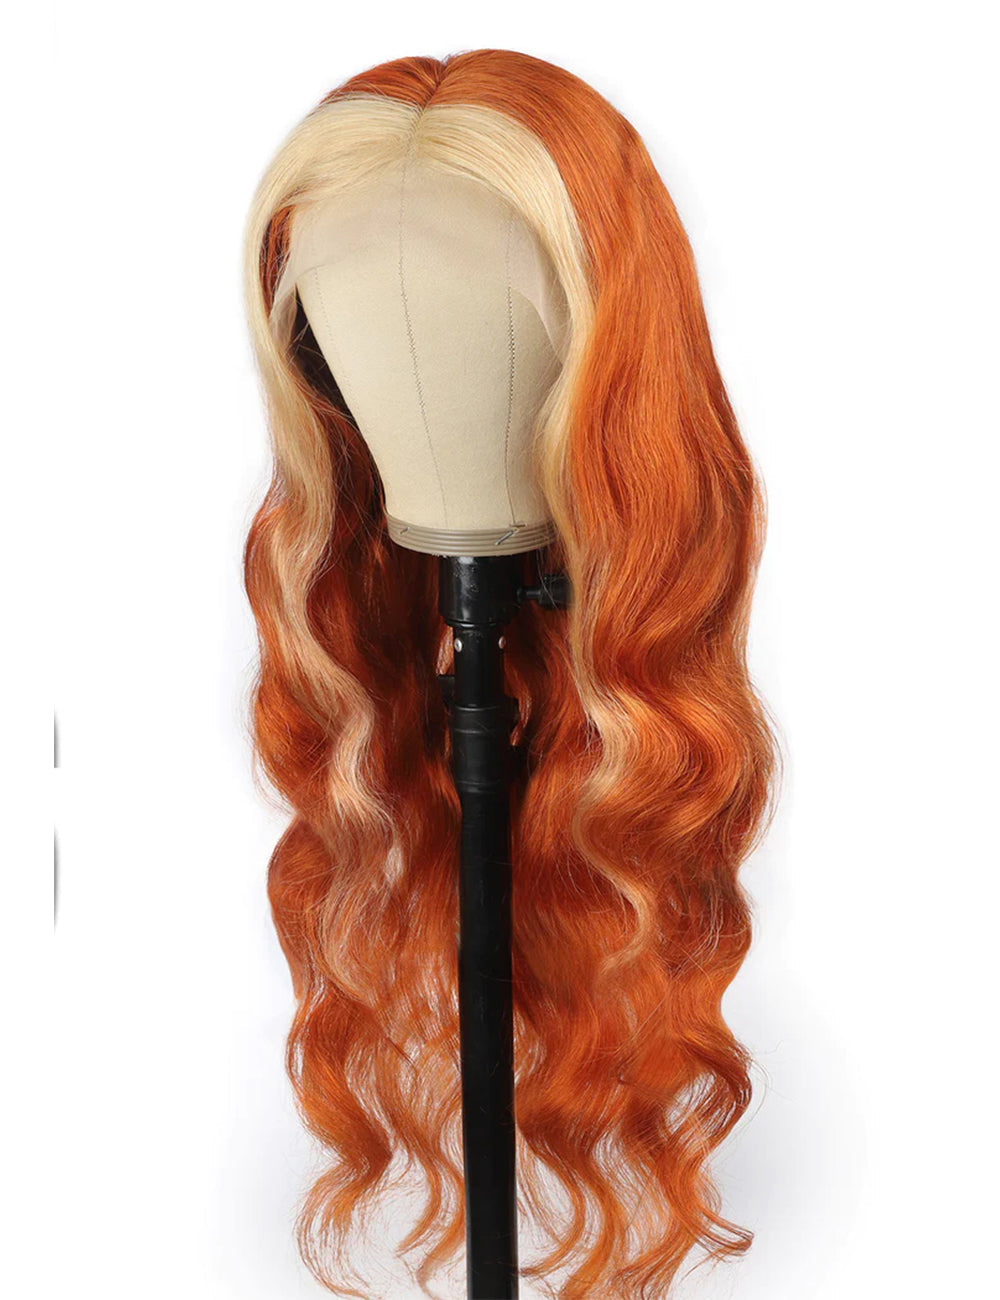 Ginger Blonde Lace Front Wig Body Wave Human Hair Wigs 200% Density HD Lace Wigs